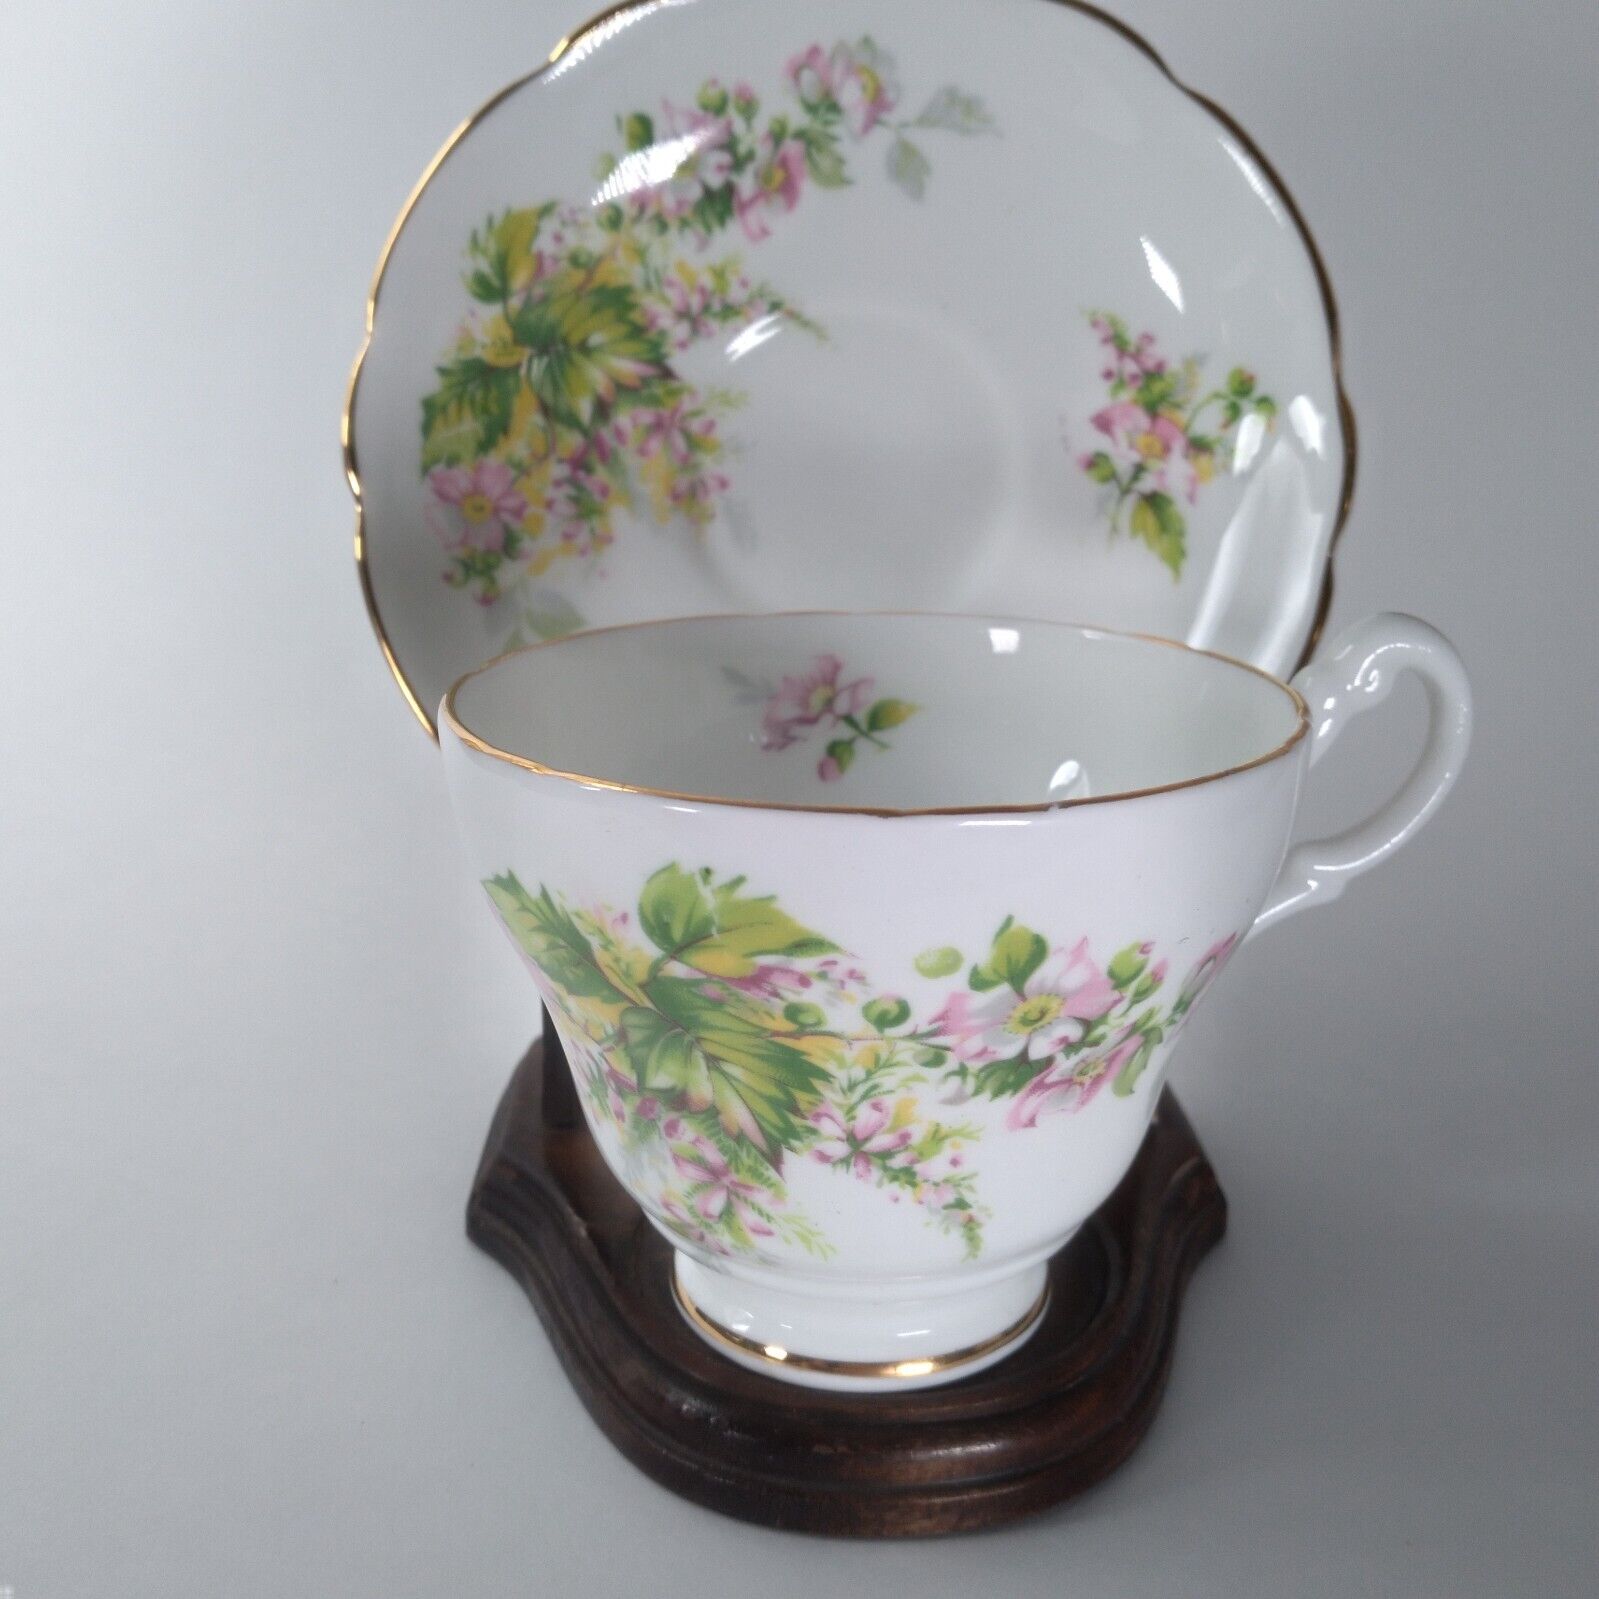 Vintage Regency Bone China Tea Cup And Saucer Pink White Flowers and Greenery